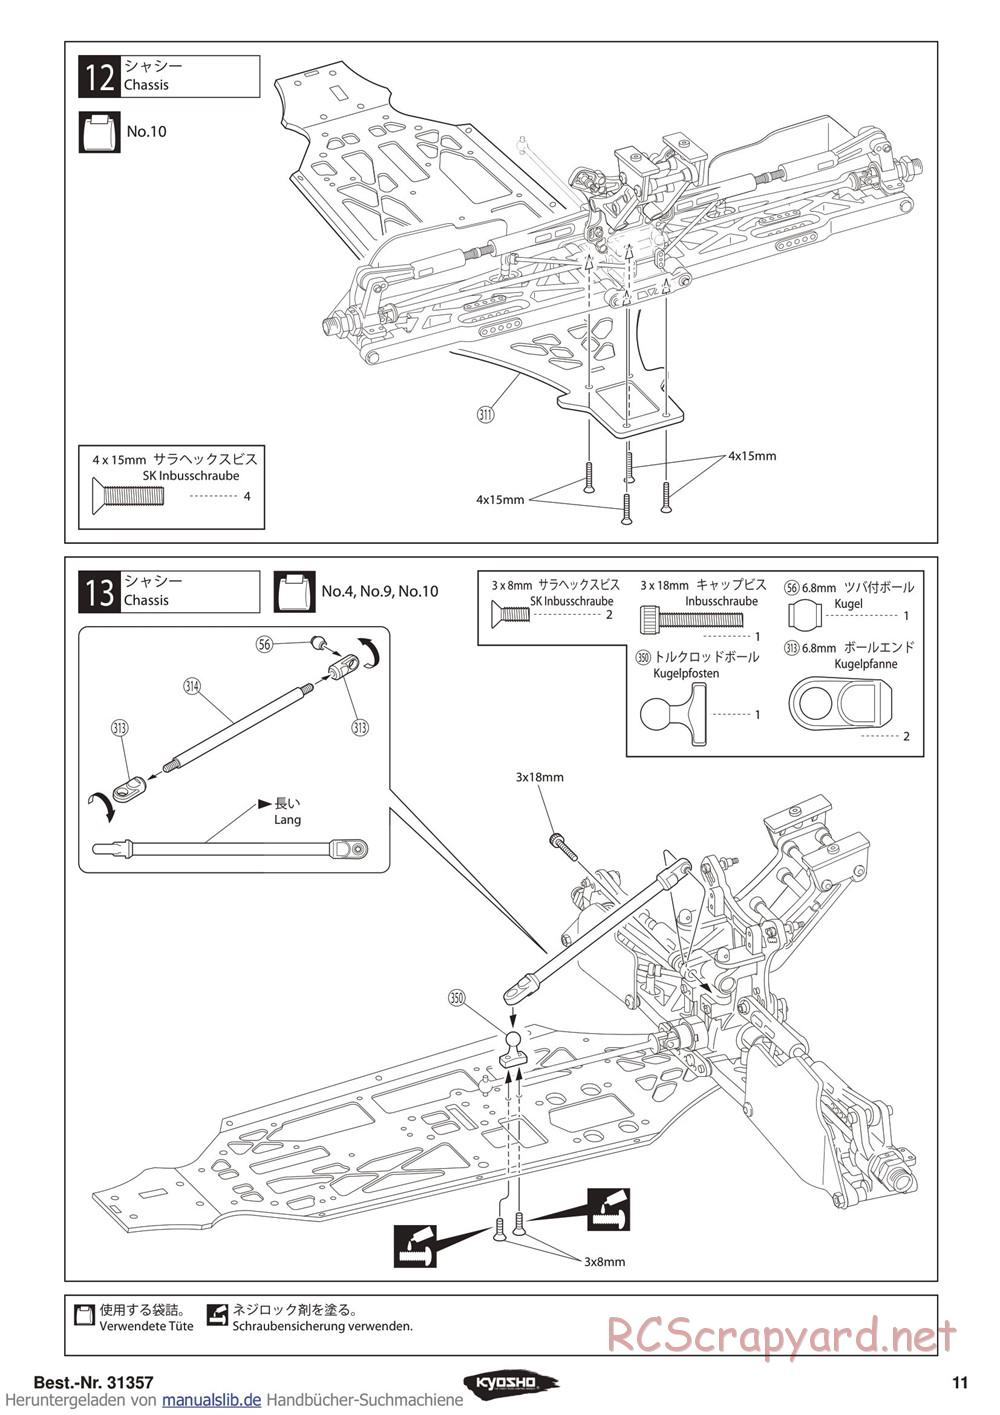 Kyosho - Inferno ST-RR Evo - Manual - Page 11